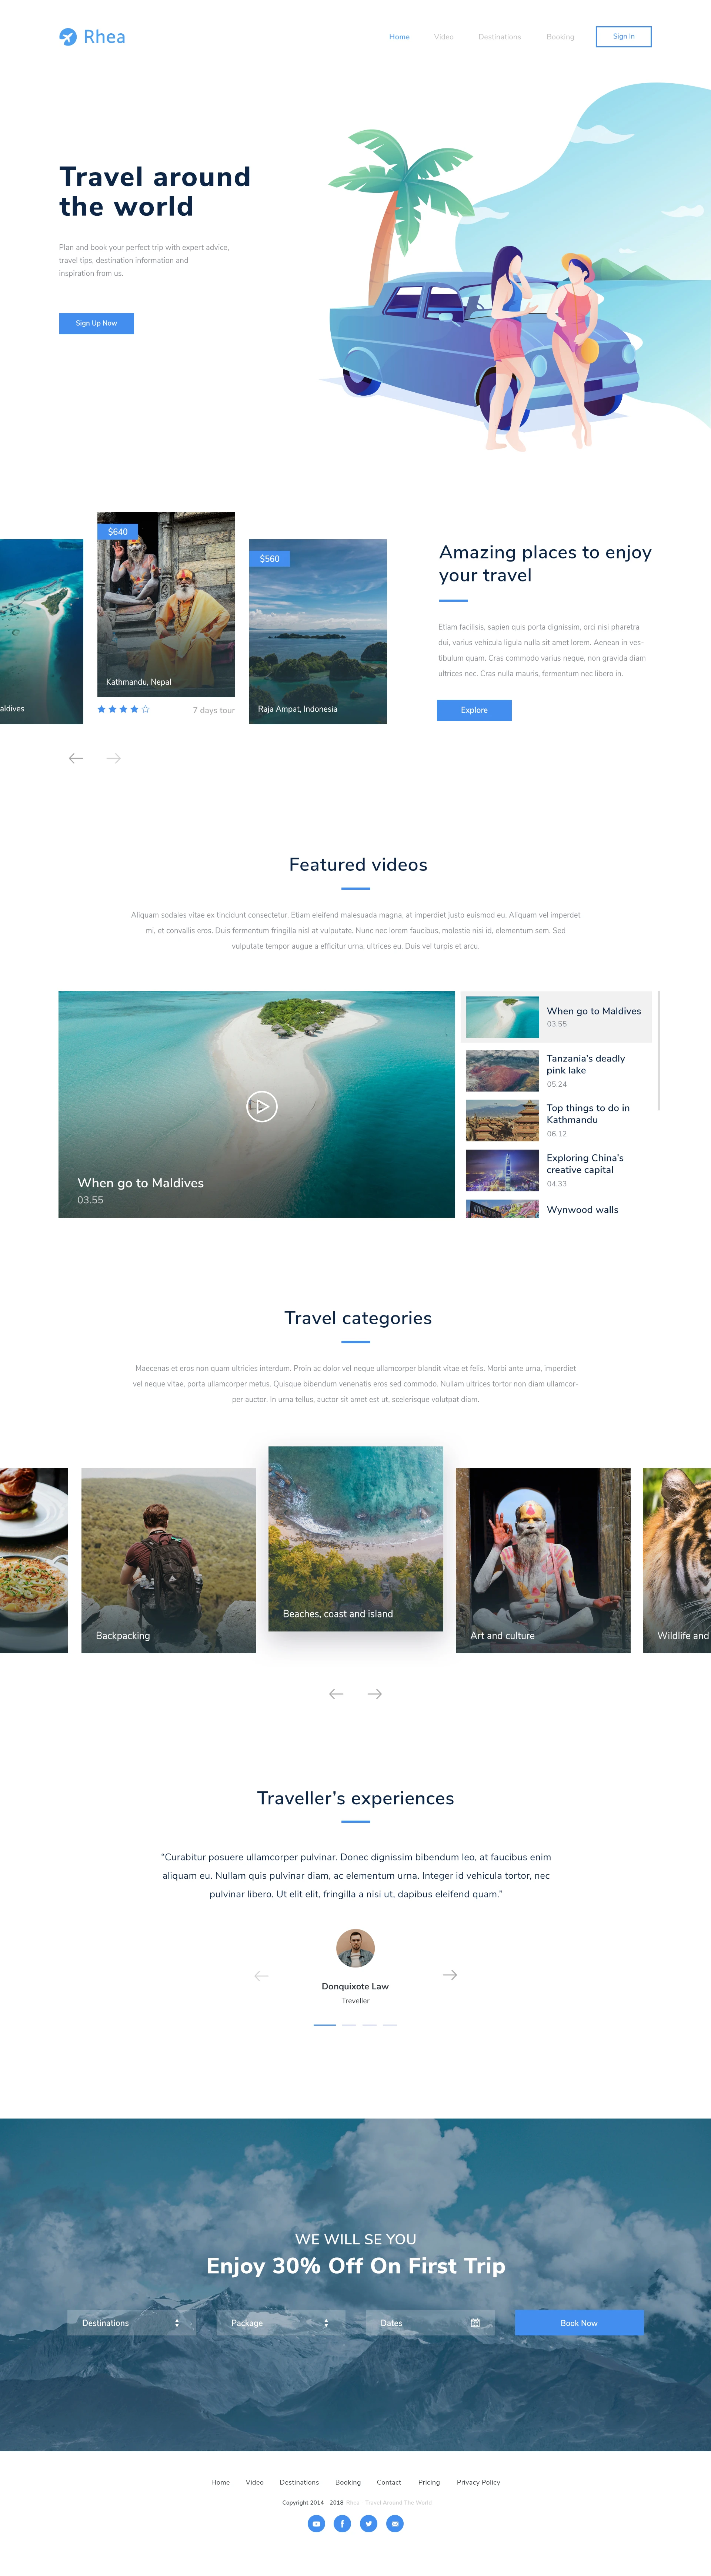 Rhea - Travel Landing Page - Elegant and clean landing page design with cool illustration.